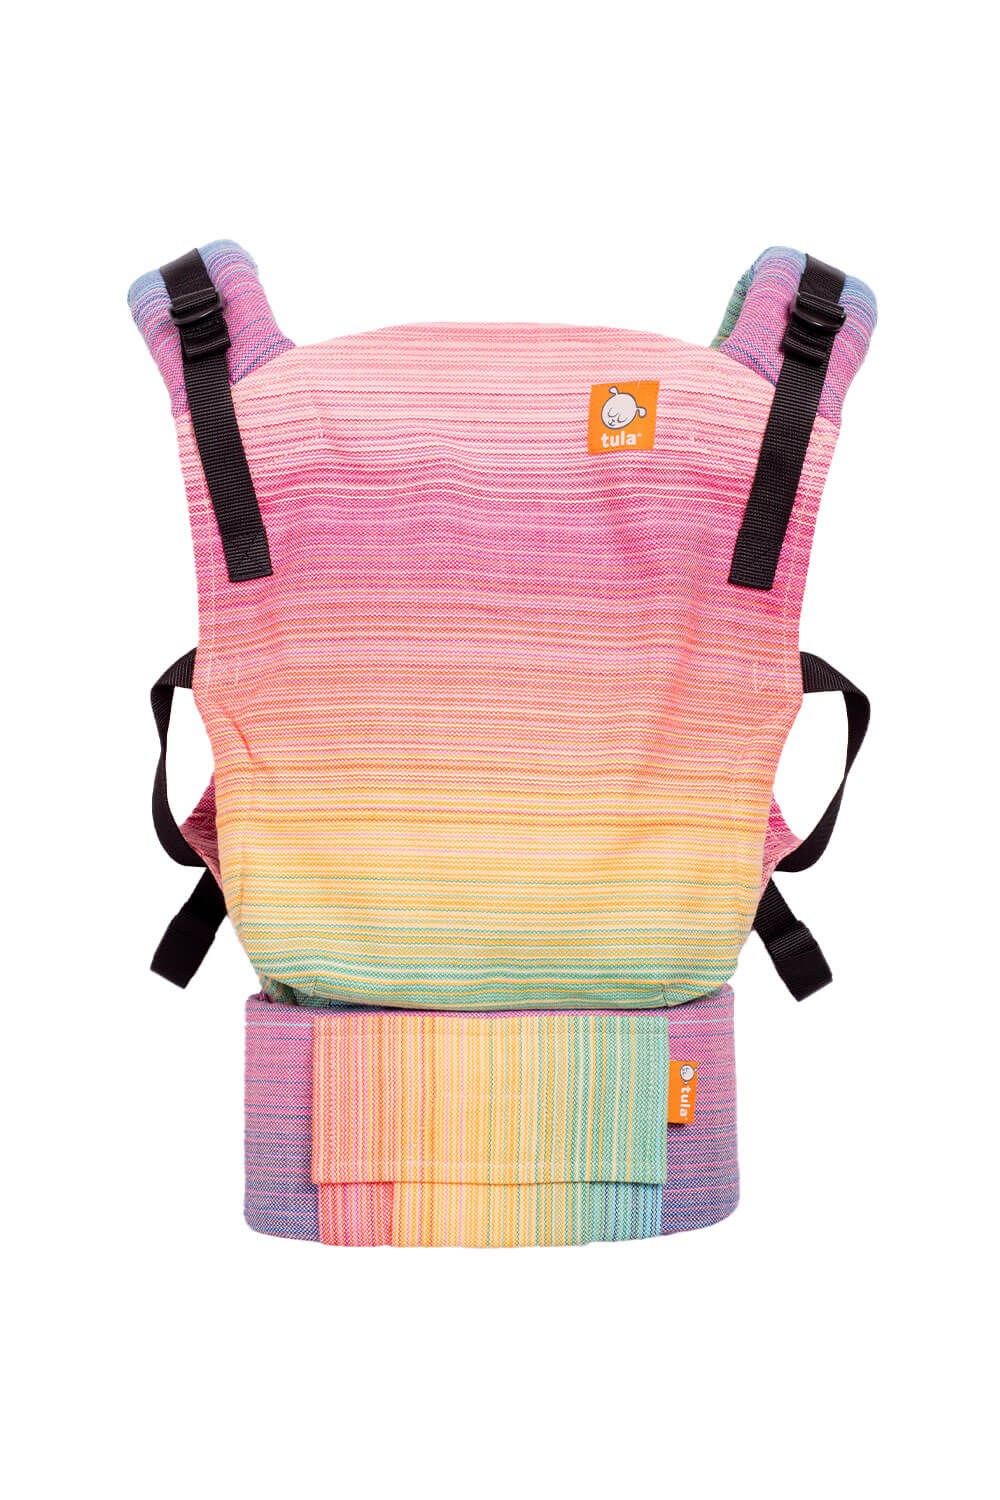 Goldie - Signature Handwoven Free-to-Grow Baby Carrier